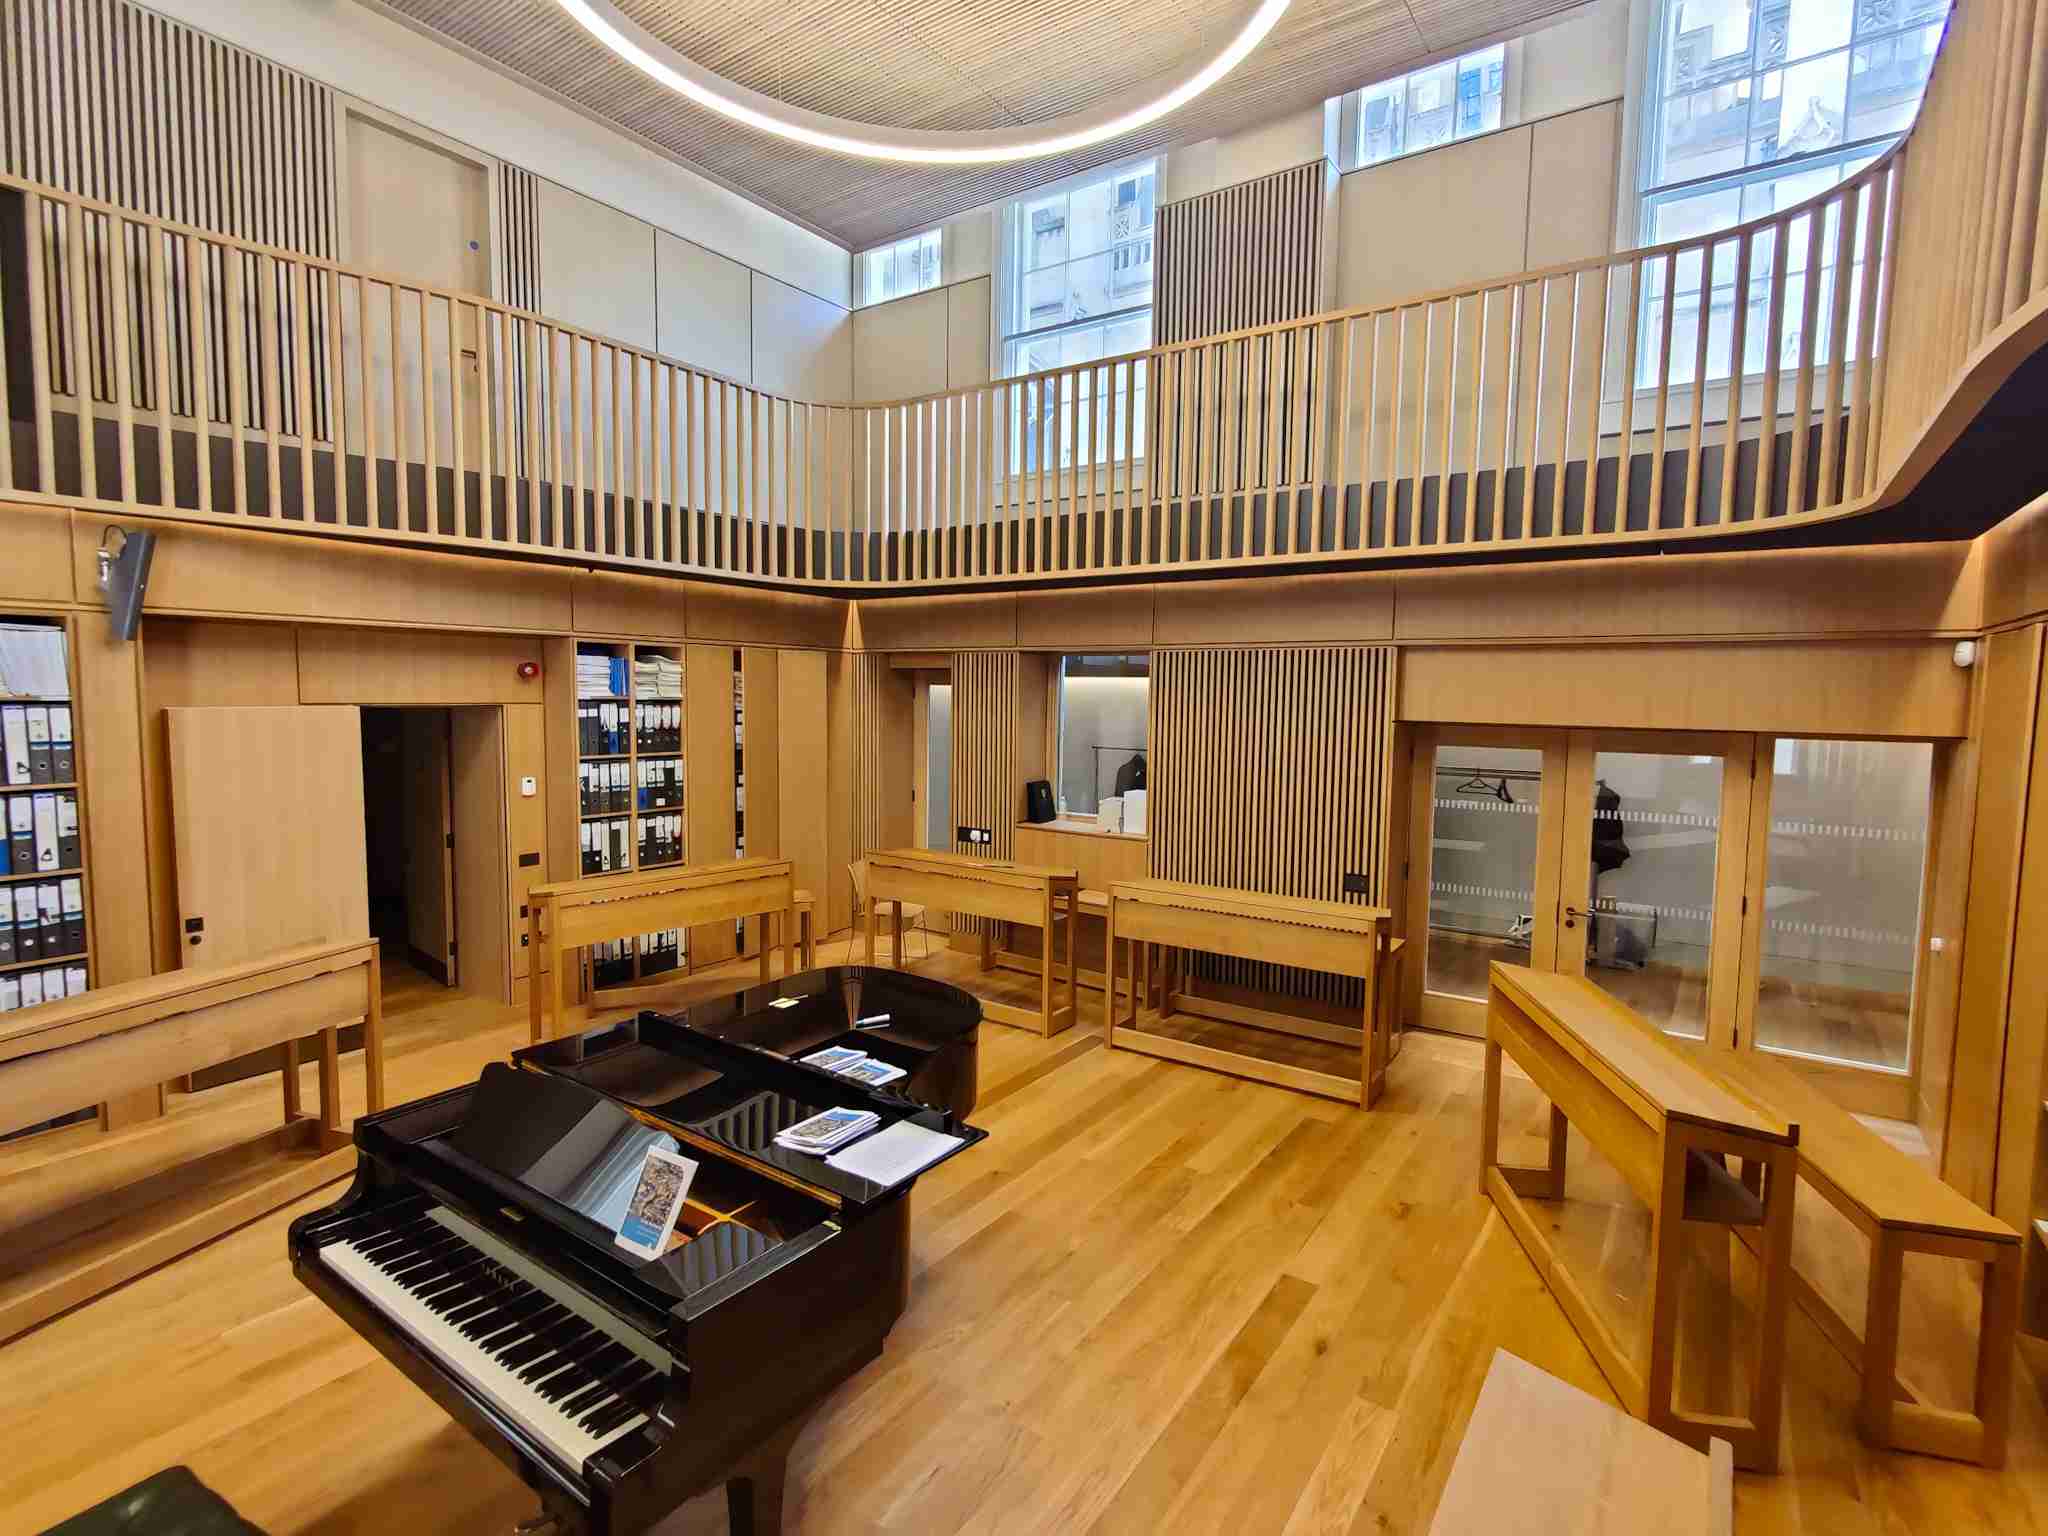 Bath Abbey's new Song School space with piano